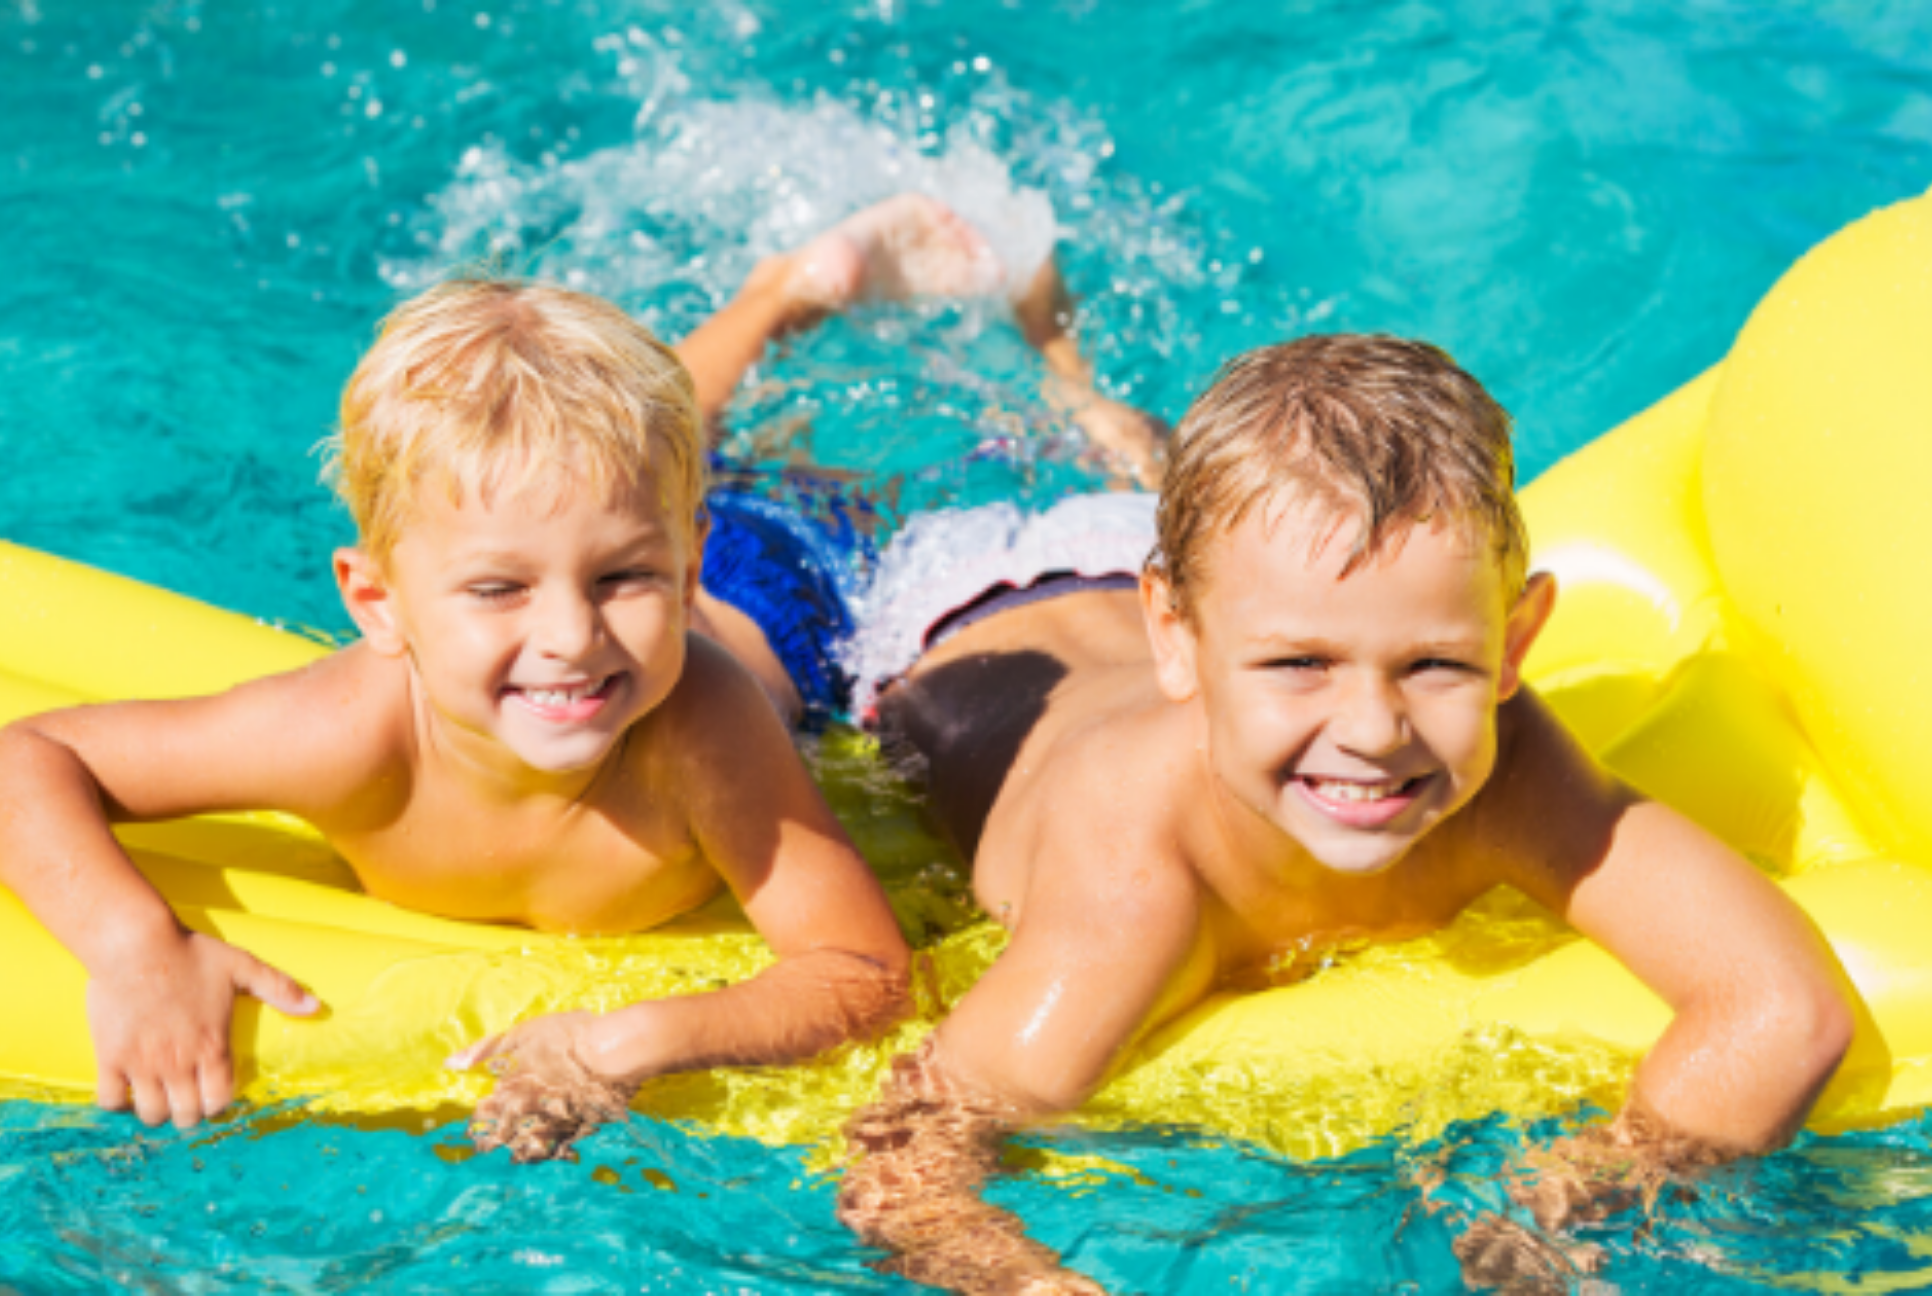 Two boys smile on a yellow pool float